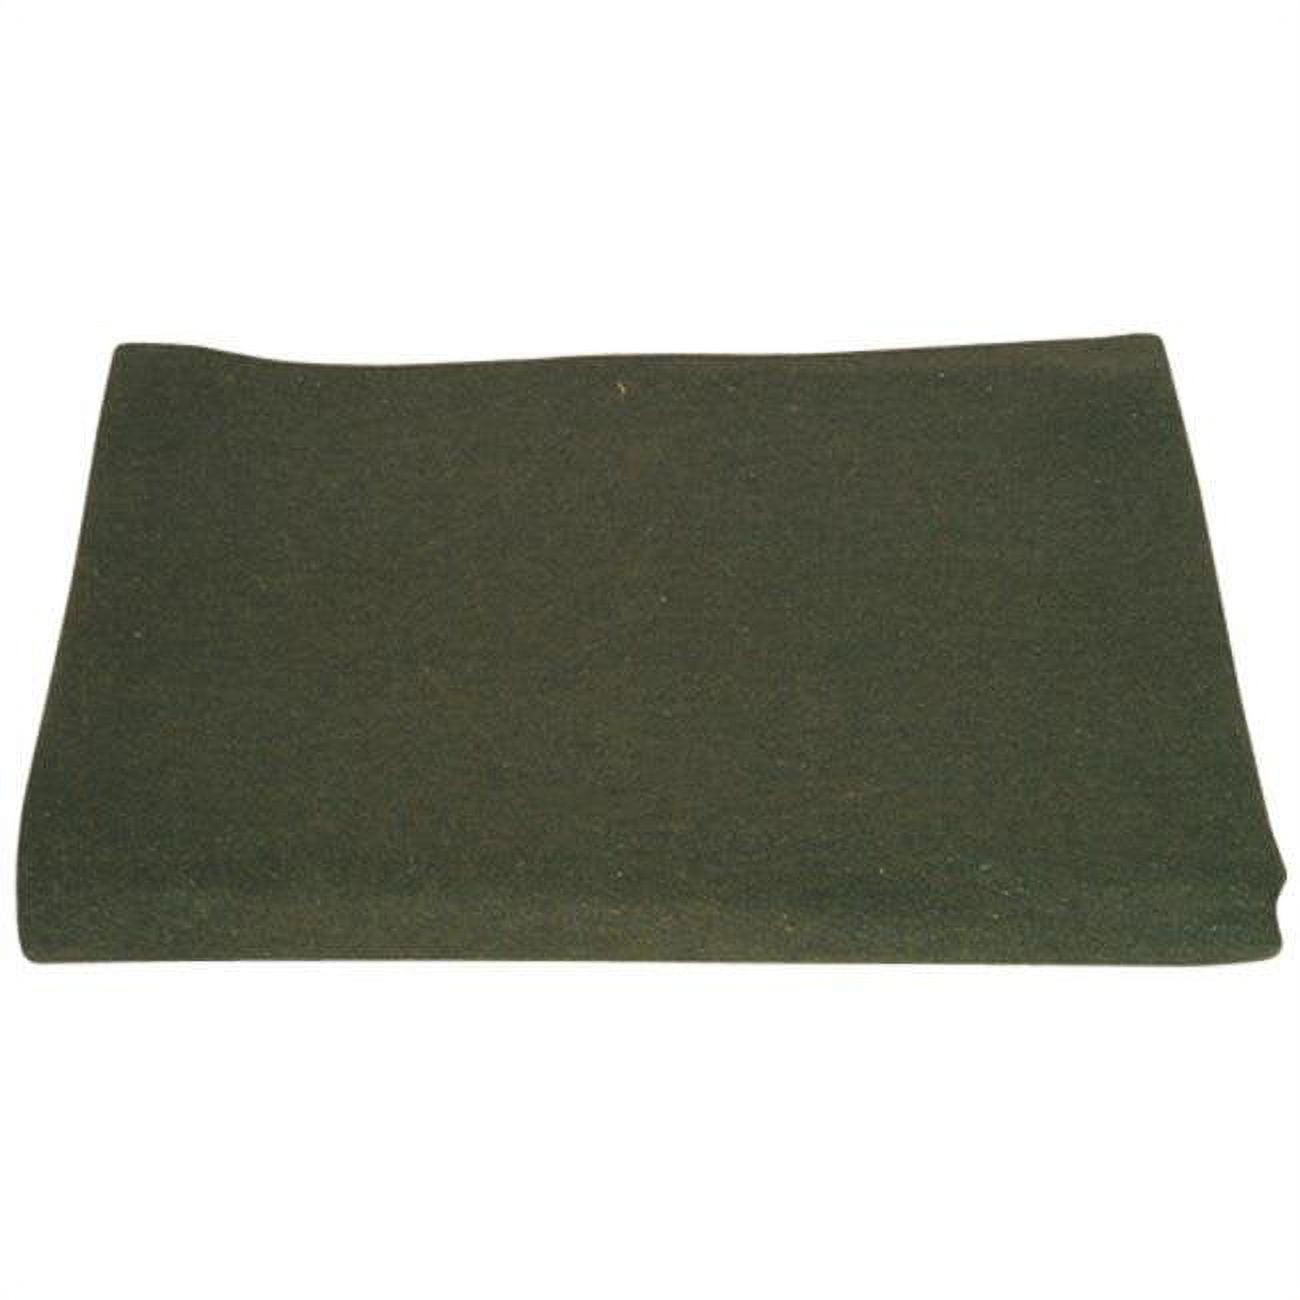 Olive Drab 60'' x 80'' Wool-Synthetic Blend Camp Blanket